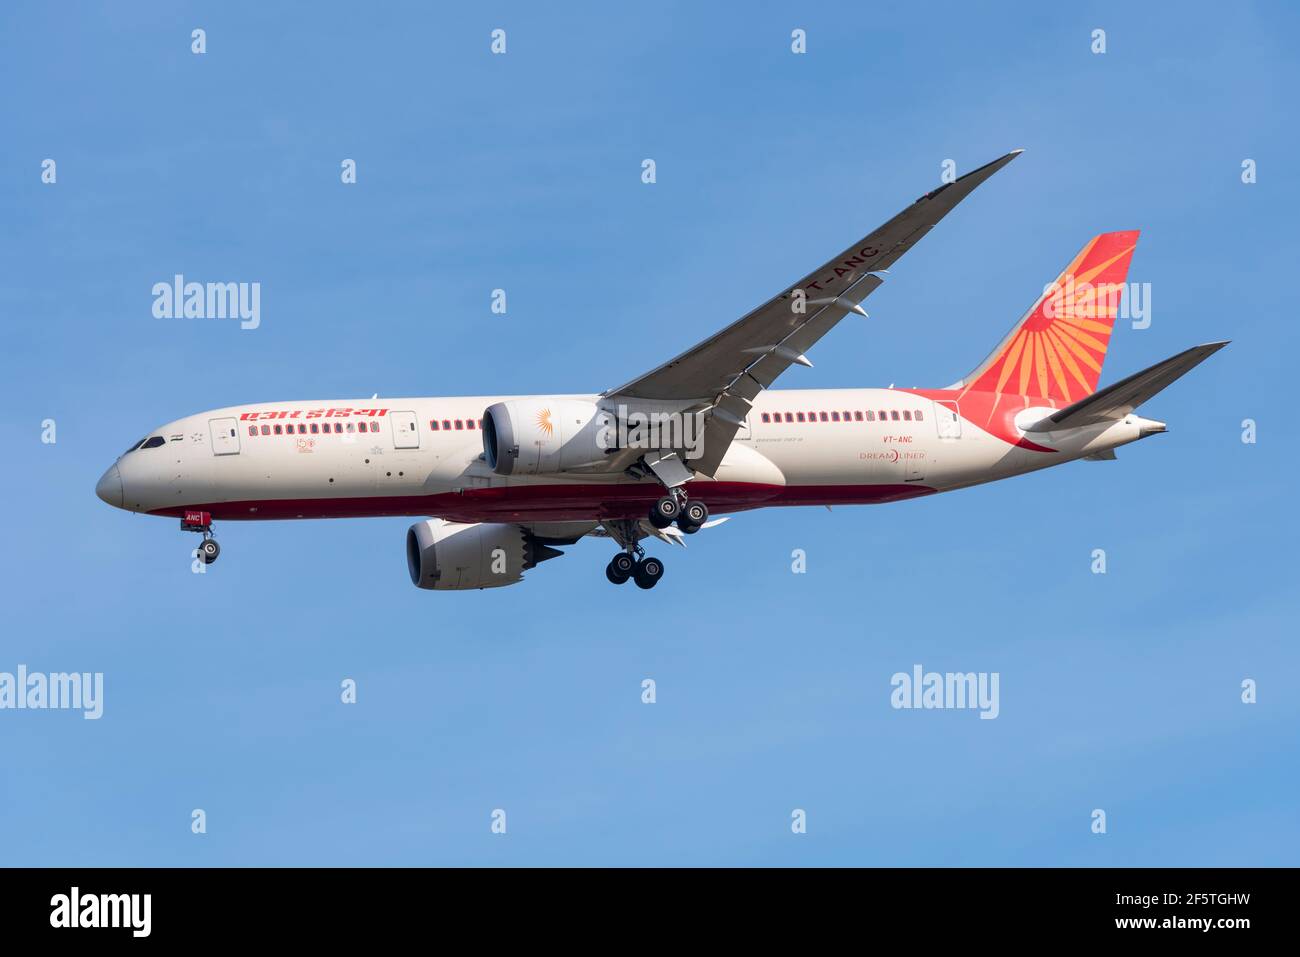 Air India Boeing 787 Dreamliner jet airliner plane VT-ANC on finals to land at London Heathrow Airport, UK, in blue sky. Indian airline, flag carrier Stock Photo